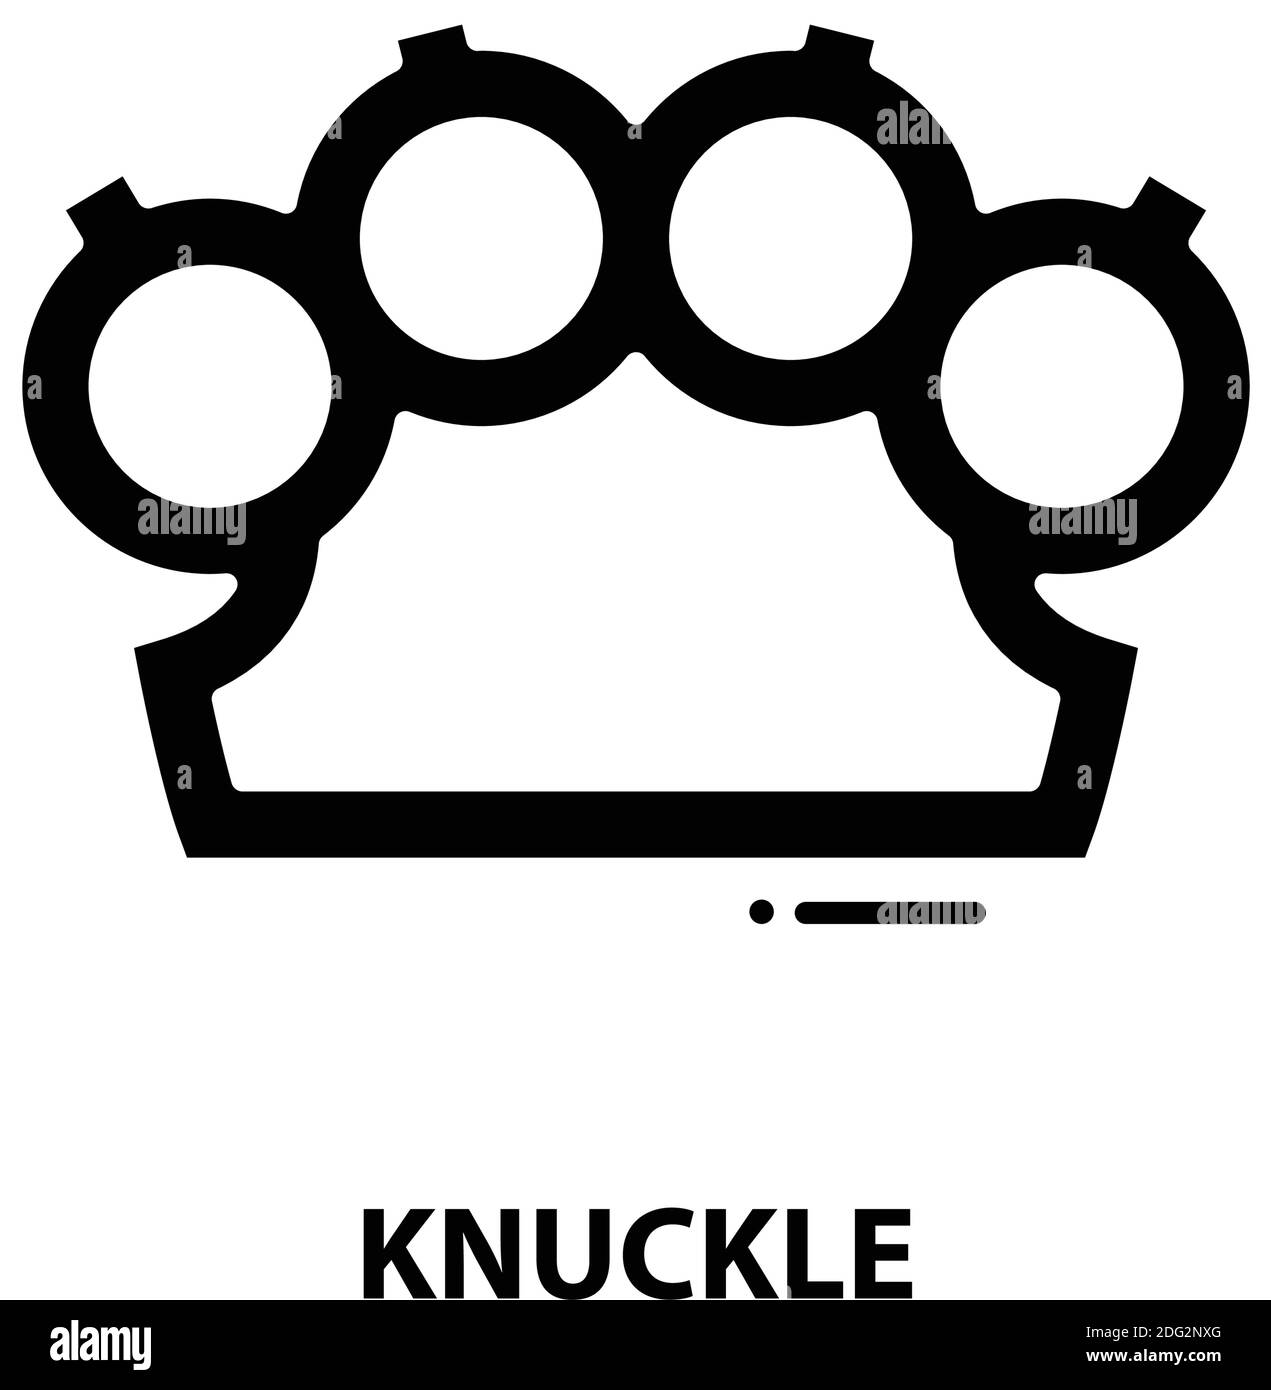 knuckle icon, black vector sign with editable strokes, concept illustration Stock Vector